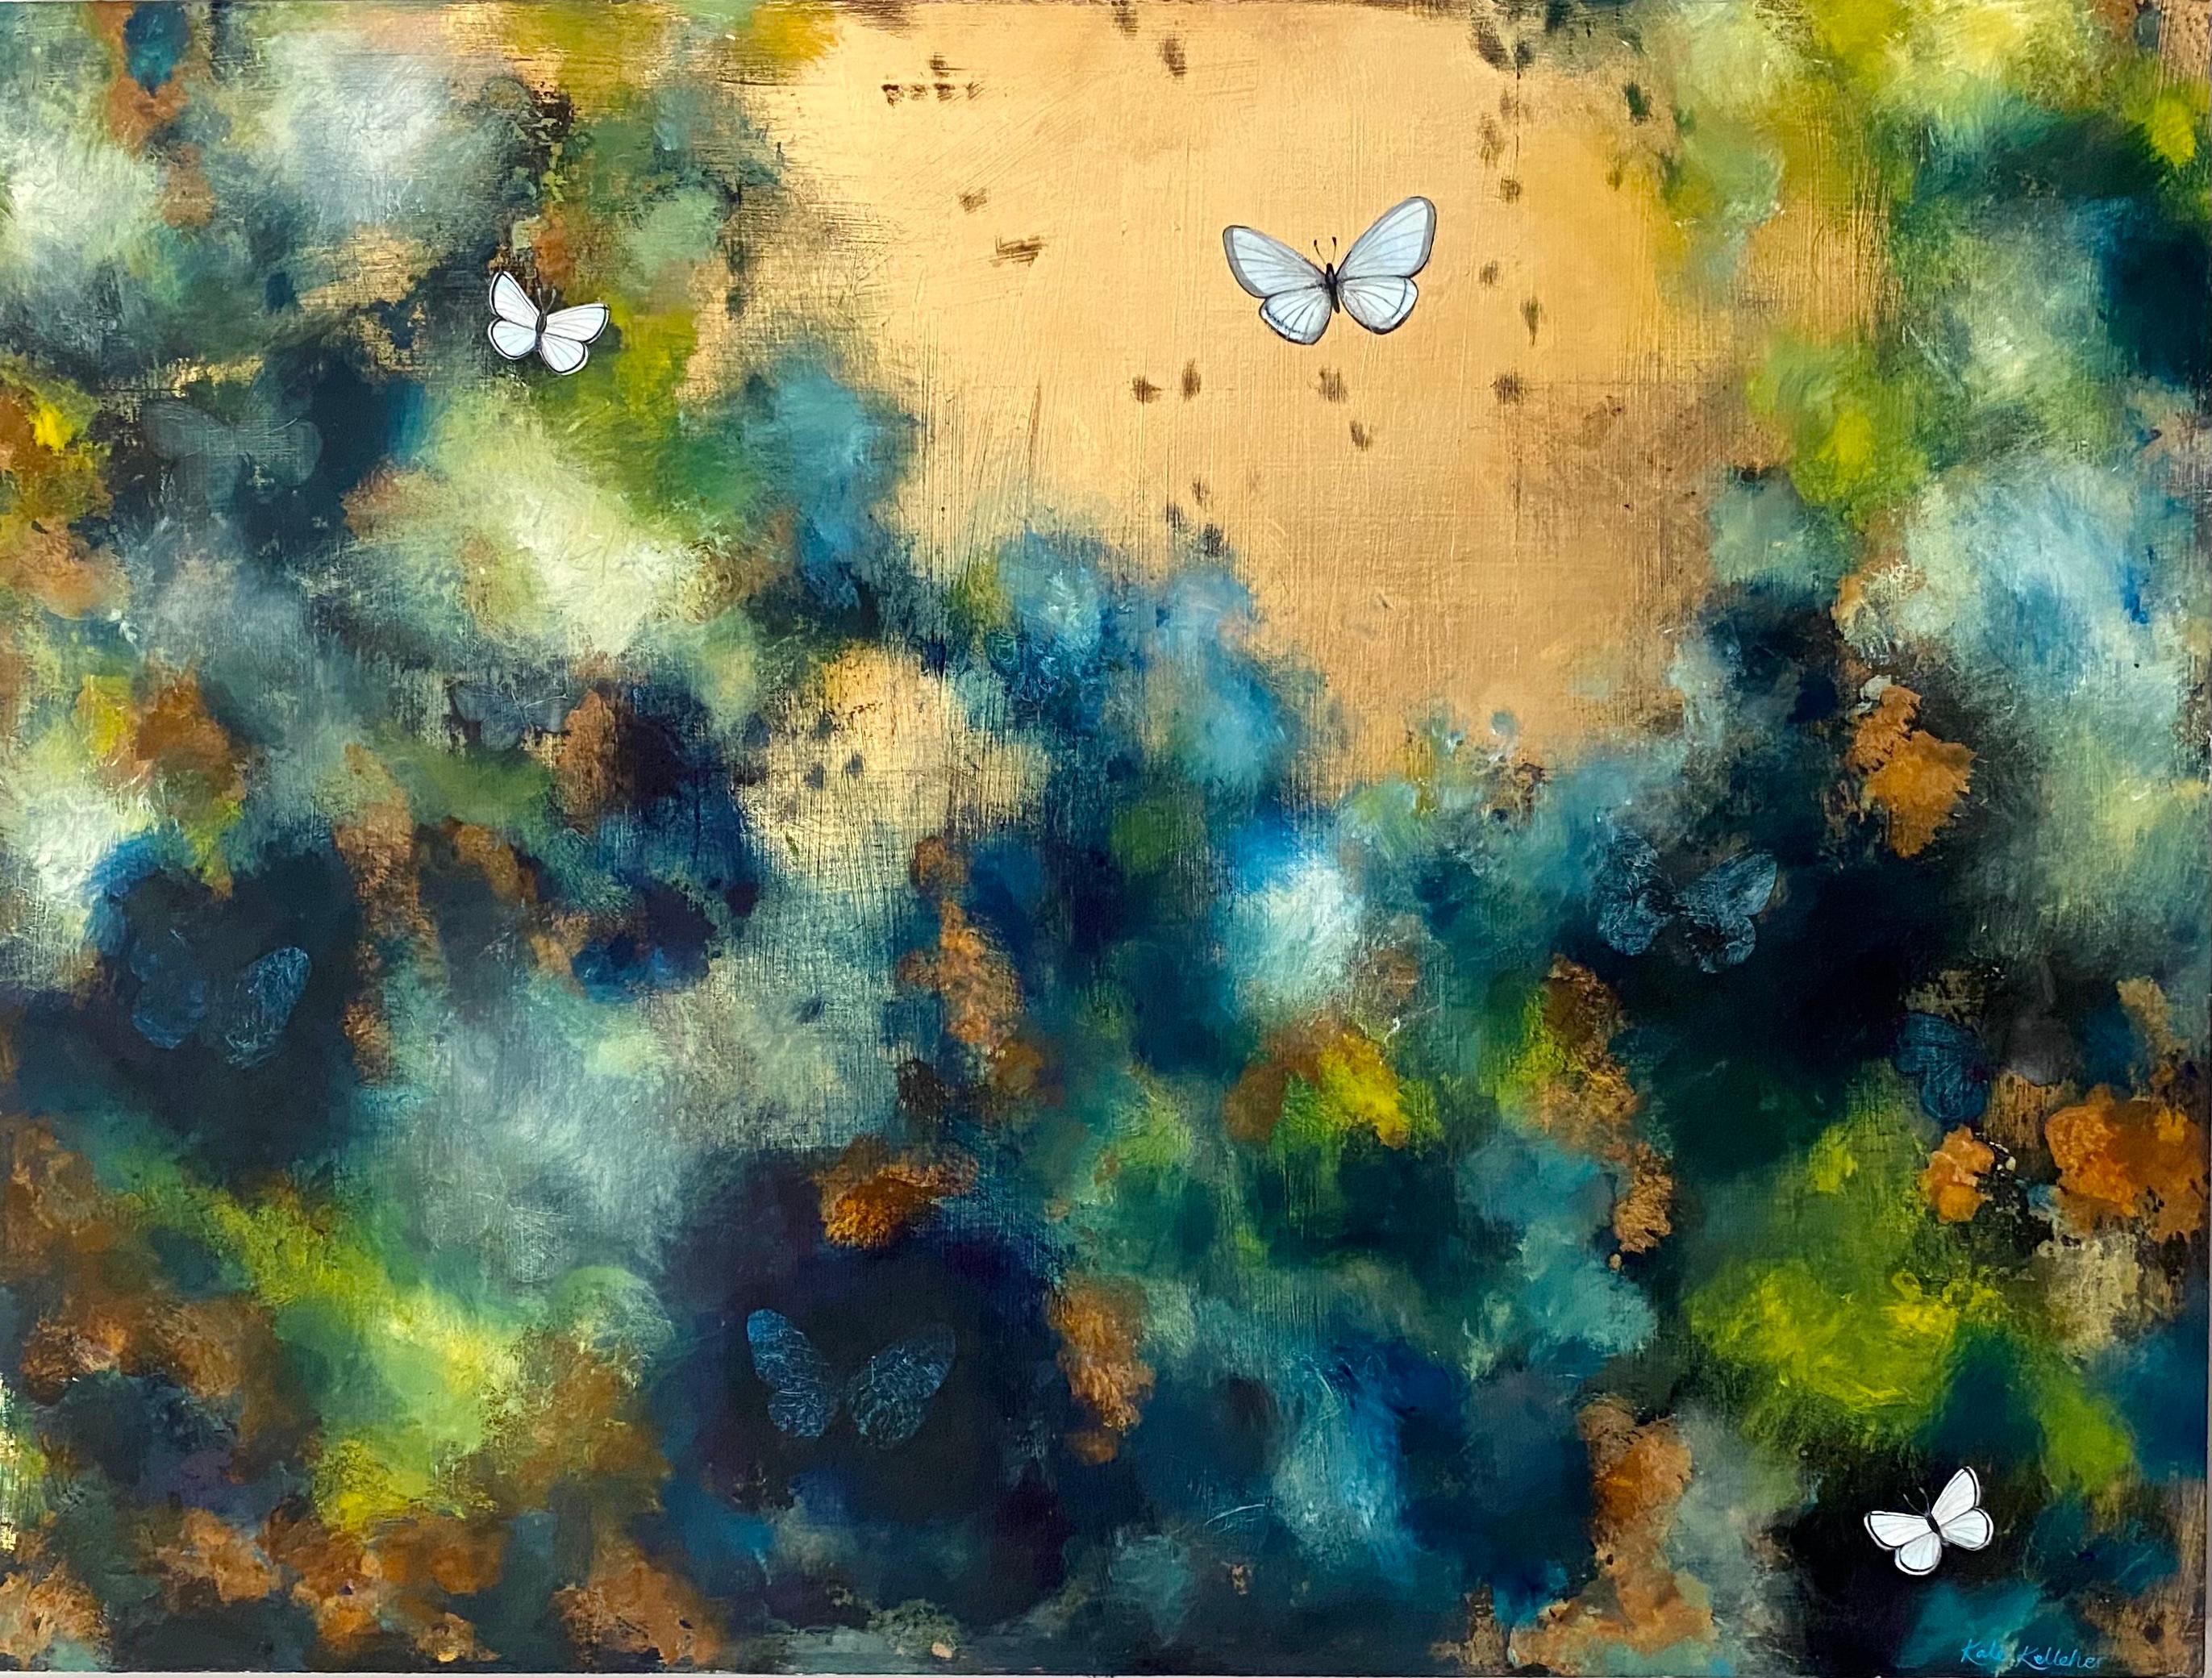 Finding Our Stars abstract painting by British artist Kate Kelleher